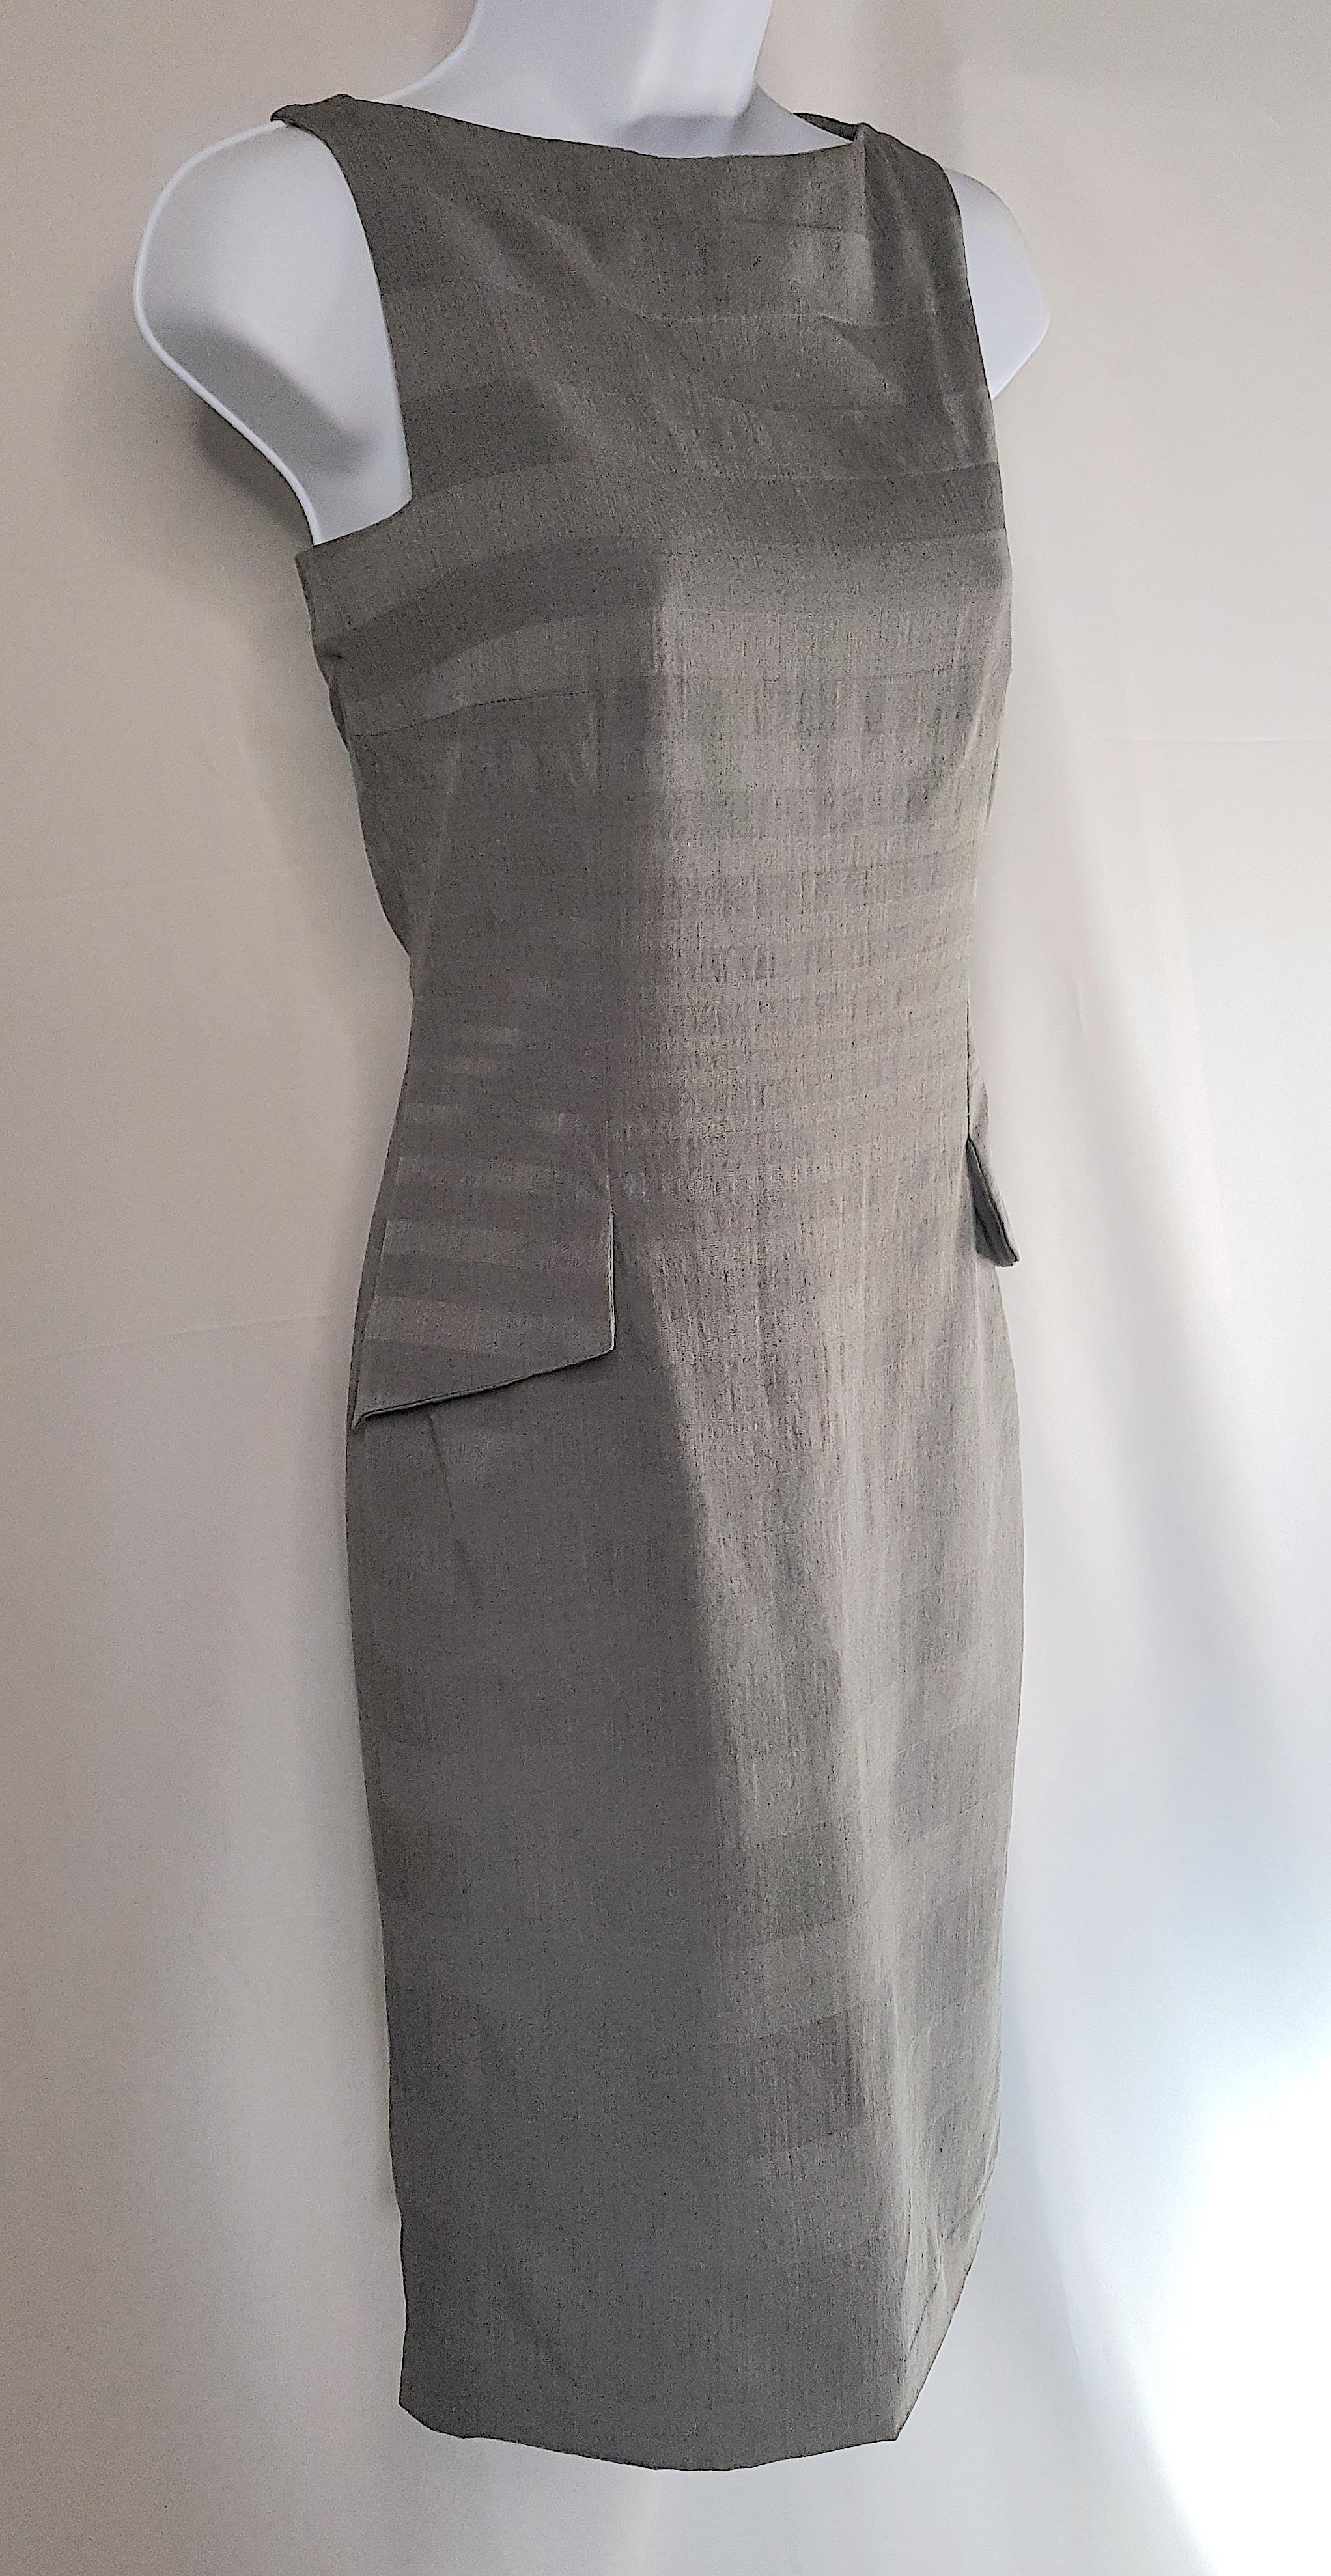 S/S1999 Galliano ChristianDiorBoutiqueParis CoutureSilkWoolCrepe HipAccentDress In Good Condition For Sale In Chicago, IL